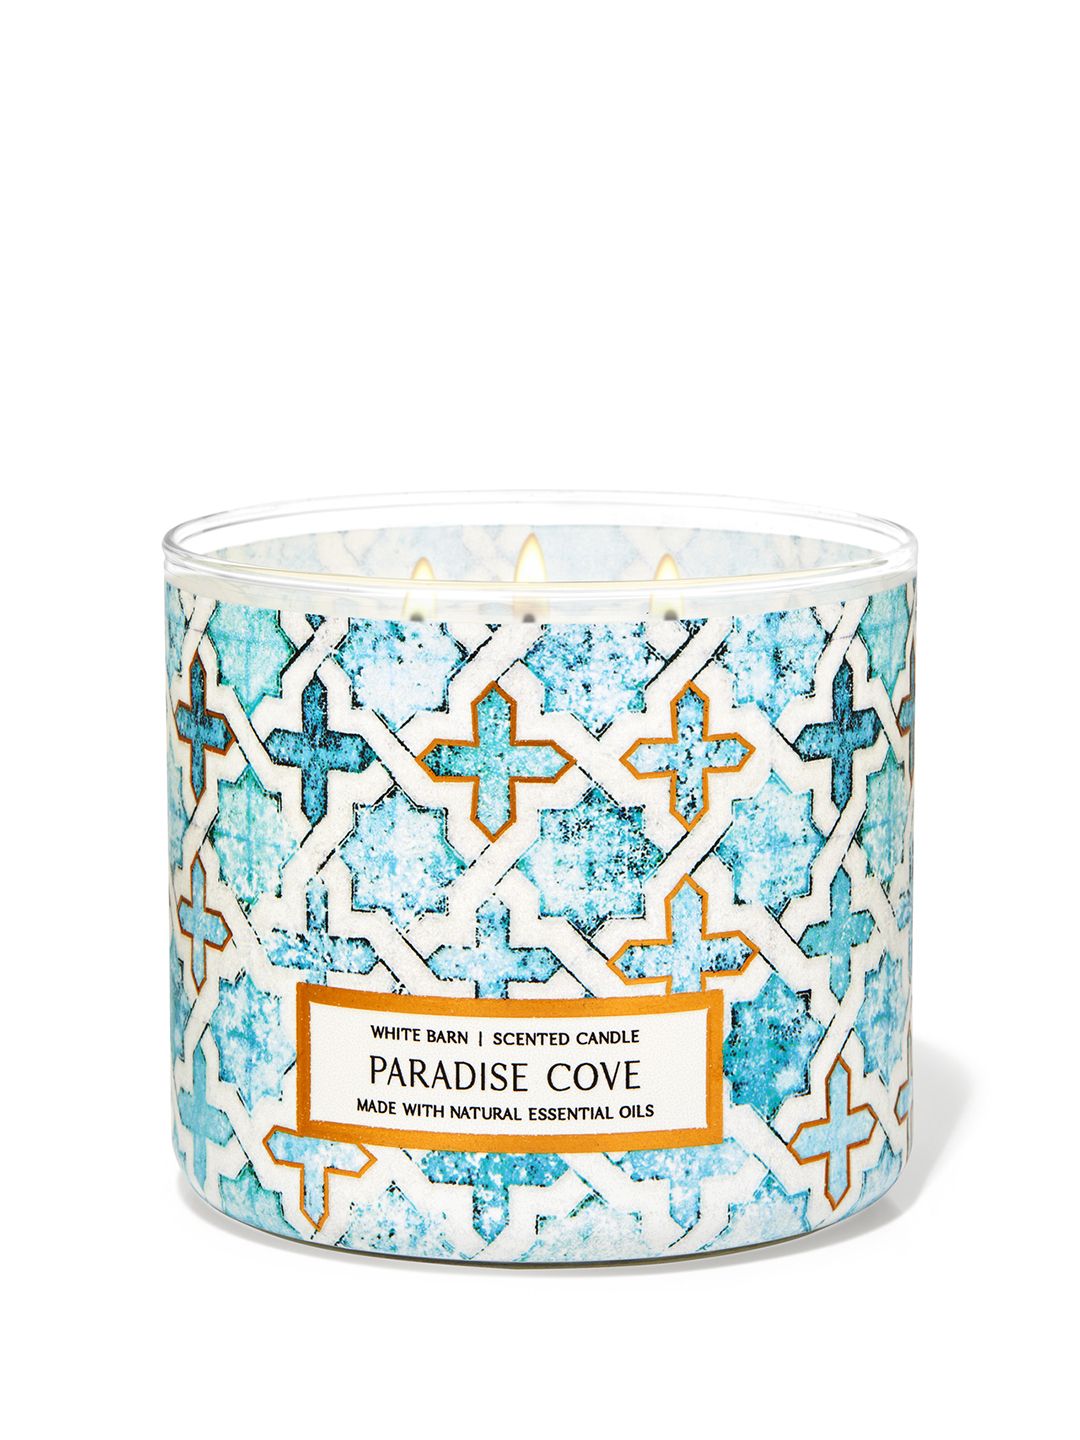 Bath & Body Works White Barn Paradise Cove 3-Wick Scented Candle with Essential Oils- 411g Price in India